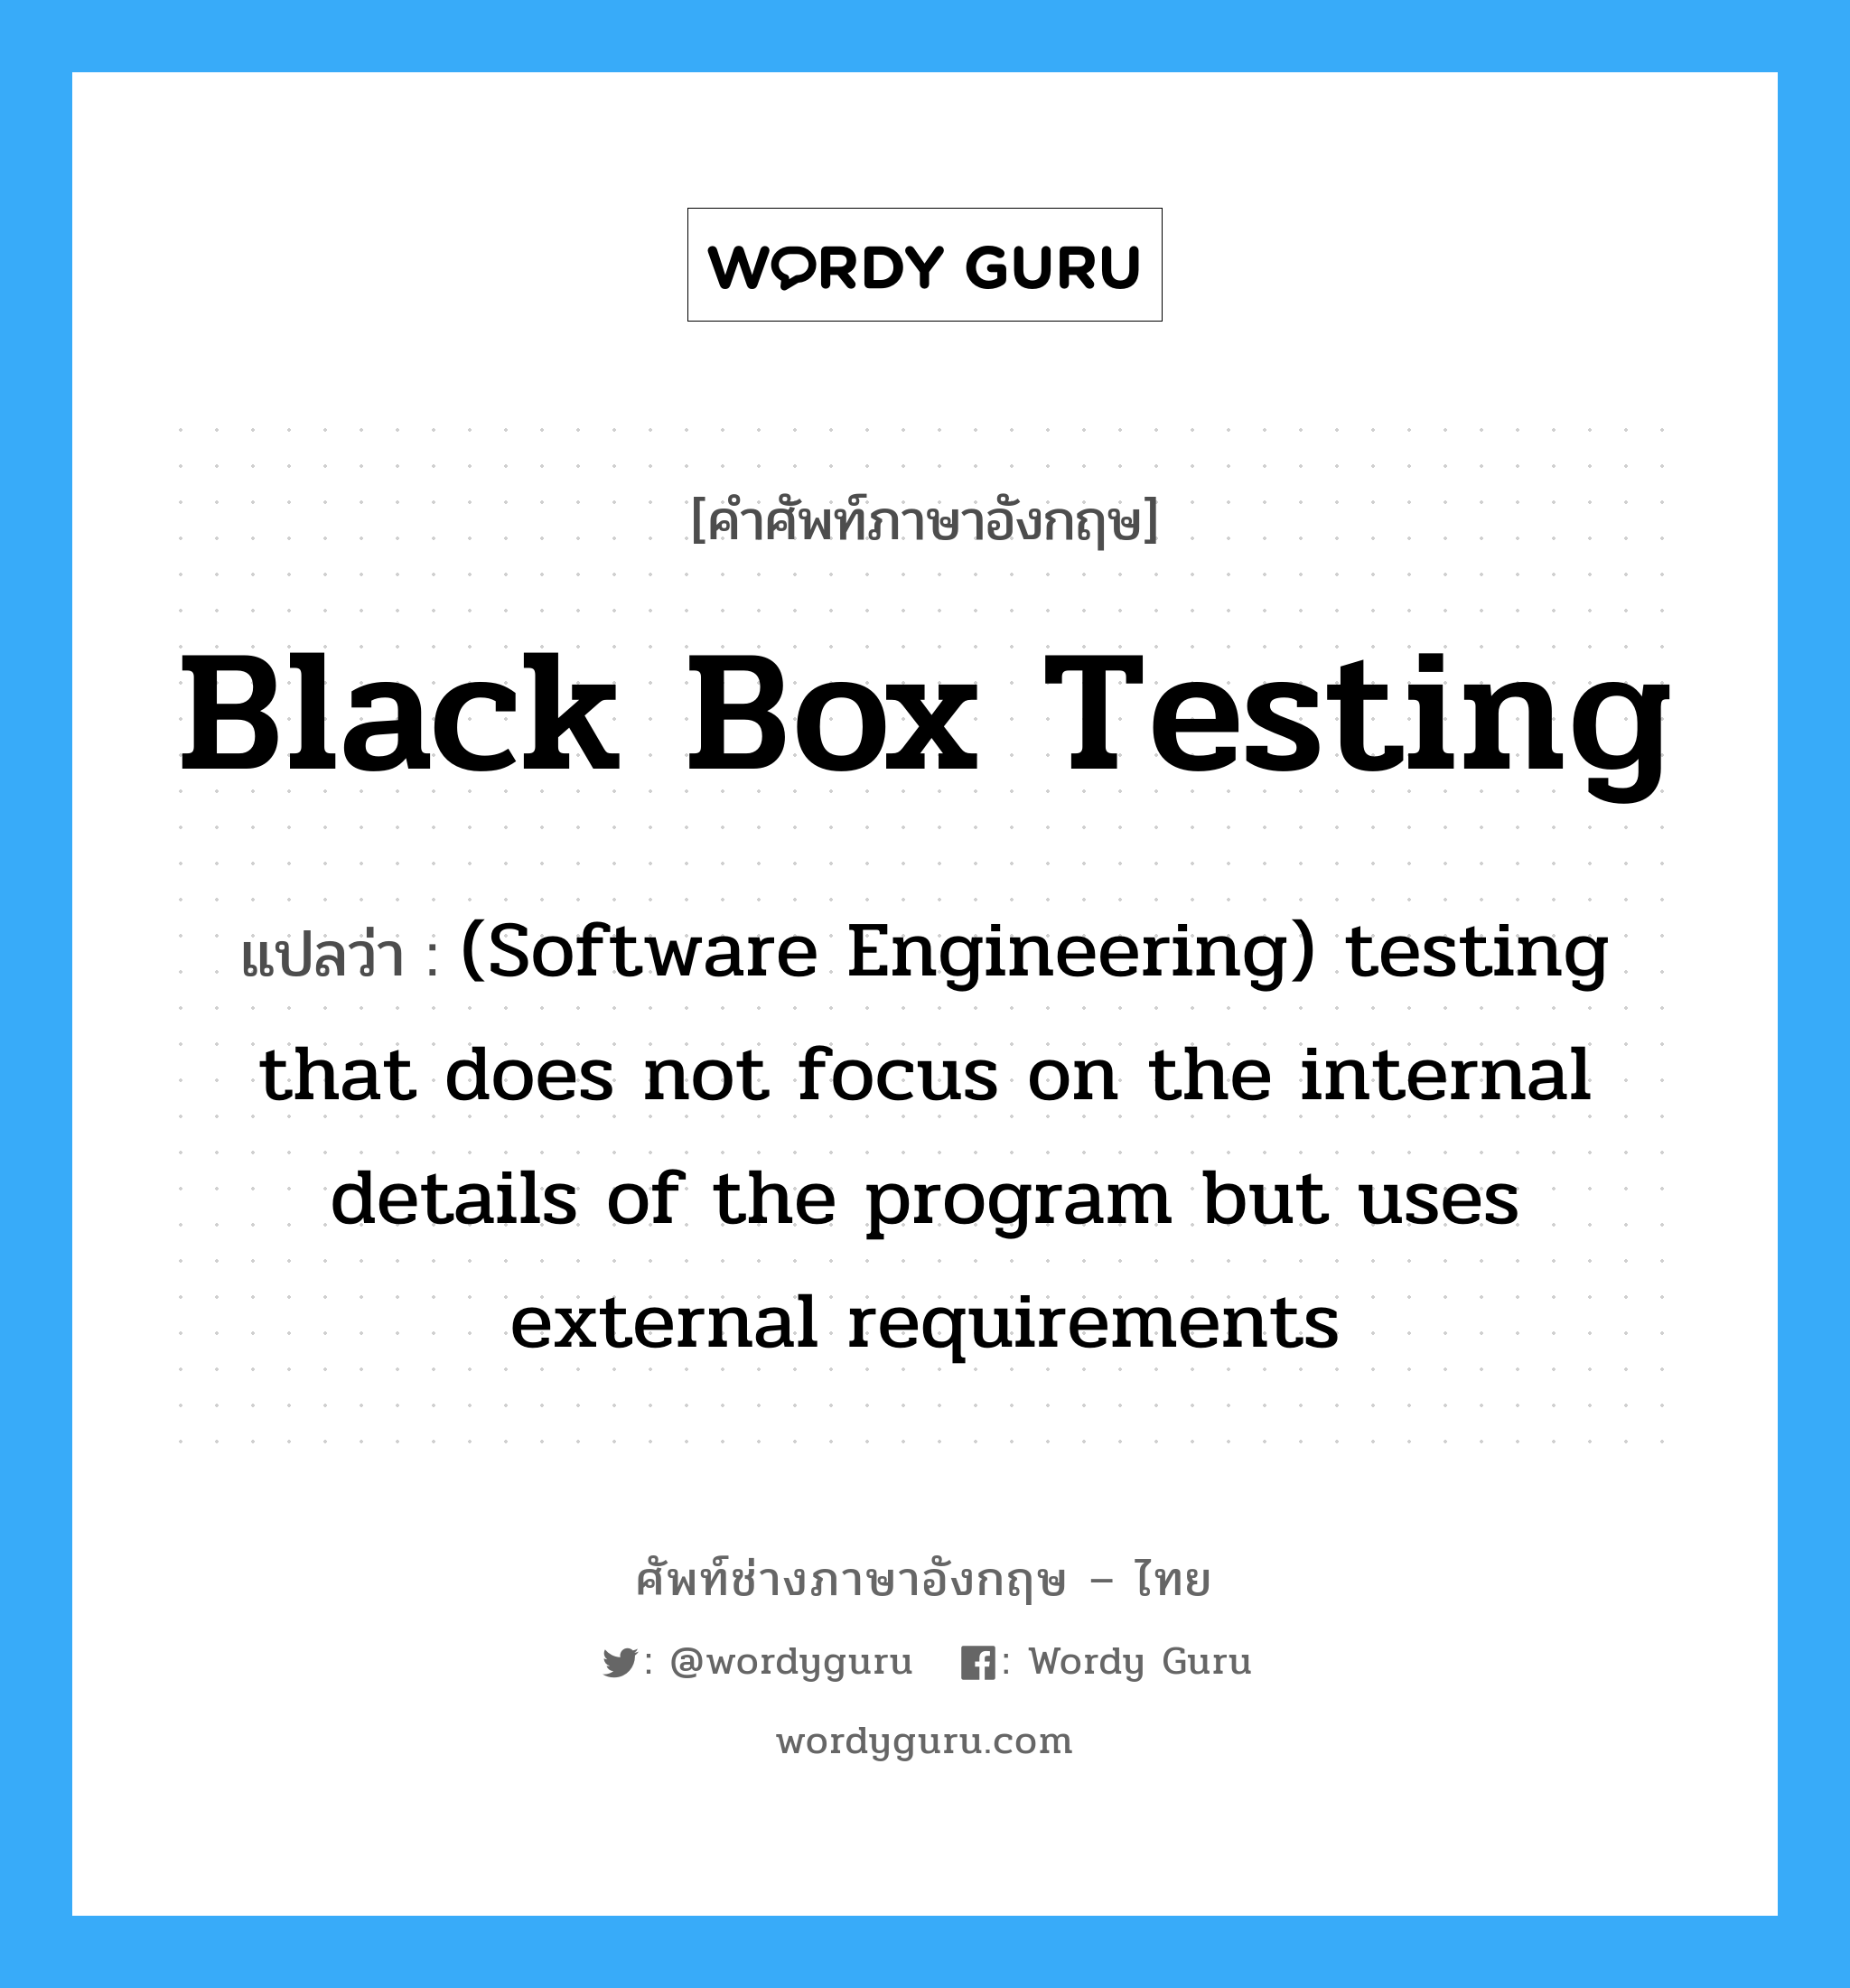 (Software Engineering) testing that does not focus on the internal details of the program but uses external requirements ภาษาอังกฤษ?, คำศัพท์ช่างภาษาอังกฤษ - ไทย (Software Engineering) testing that does not focus on the internal details of the program but uses external requirements คำศัพท์ภาษาอังกฤษ (Software Engineering) testing that does not focus on the internal details of the program but uses external requirements แปลว่า Black box testing